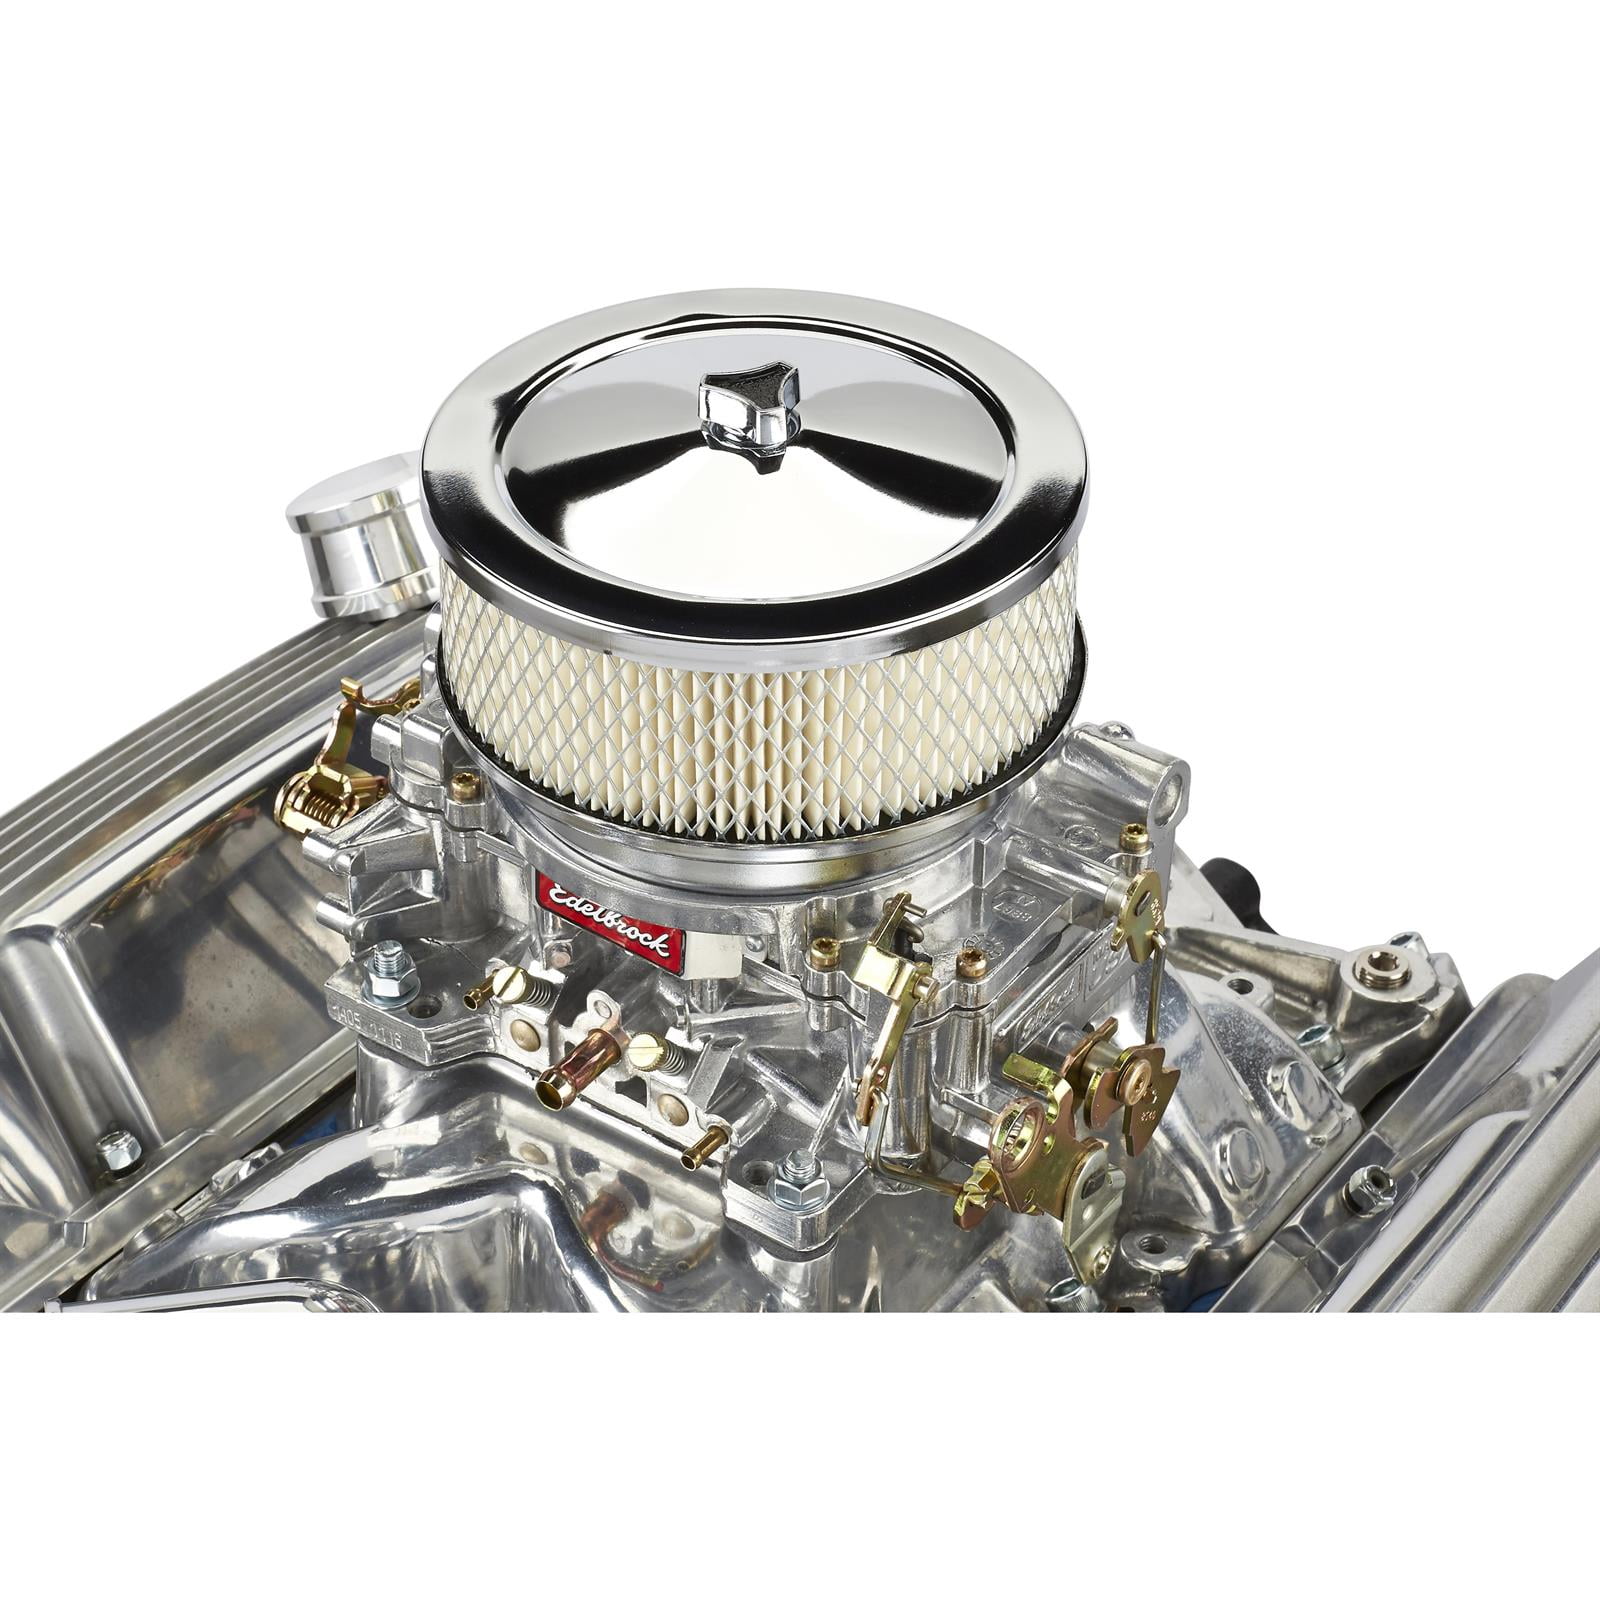 Chrome Air Cleaner, 4 Barrel Carb, 6-3/8 Inch, 5-1/8 Inch Neck